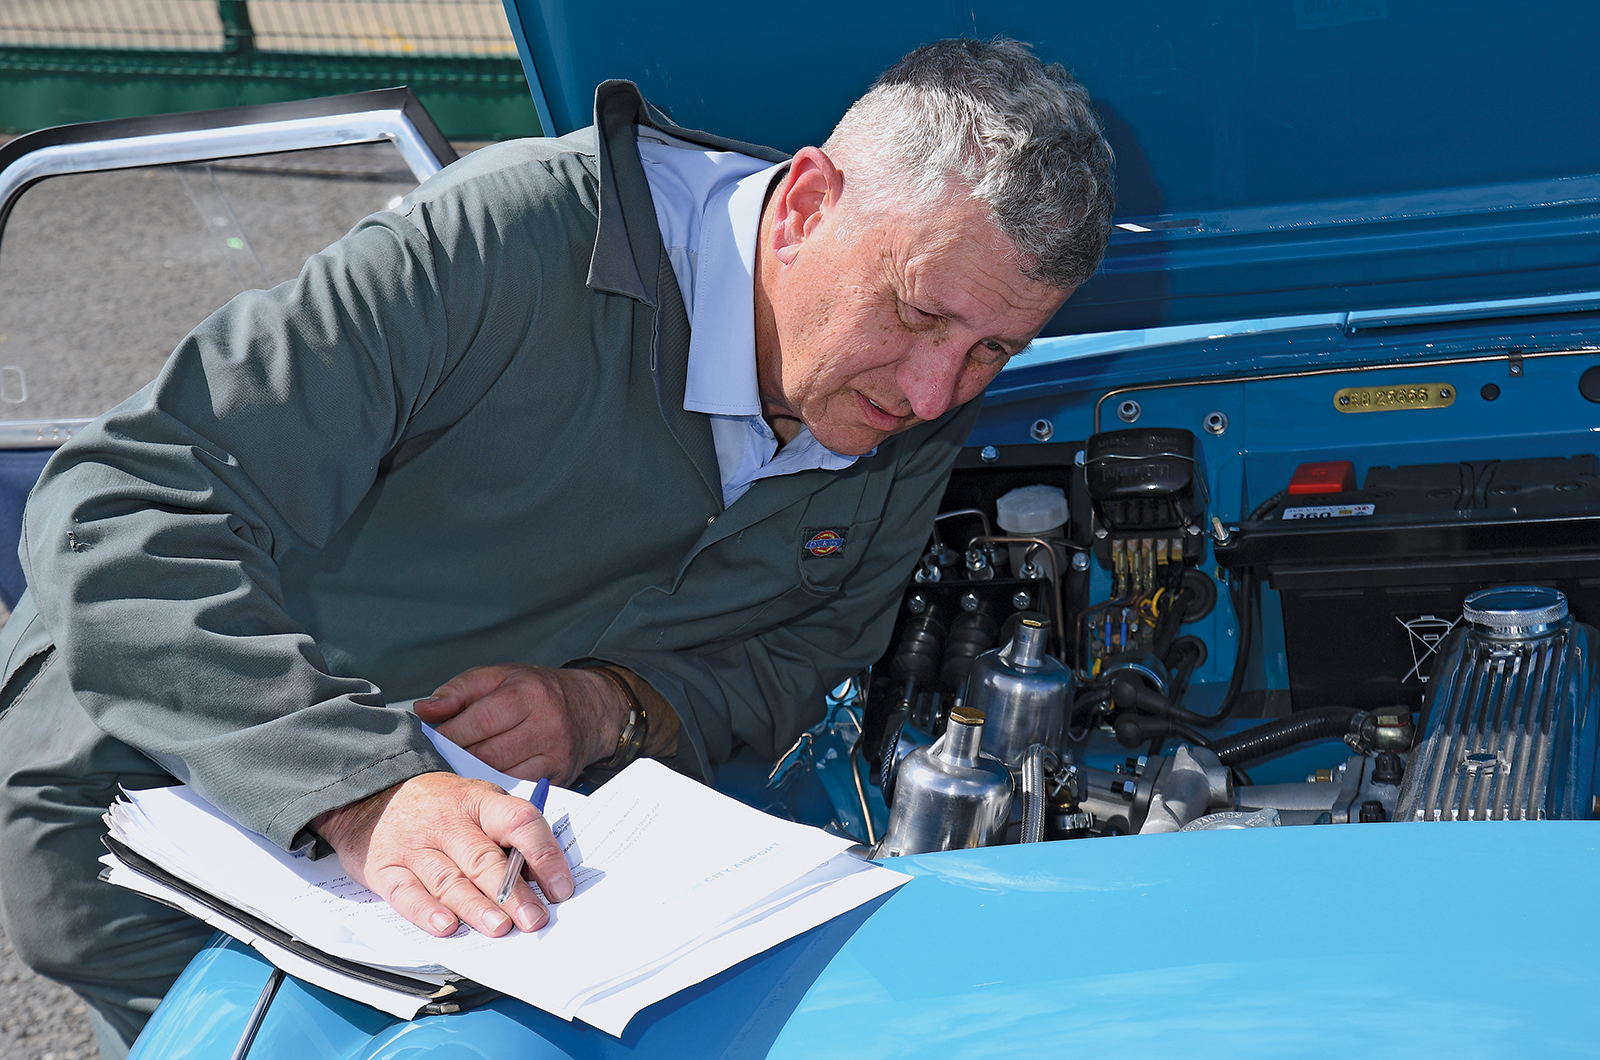 Classic & Sports Car – The specialist: Classic Assessments